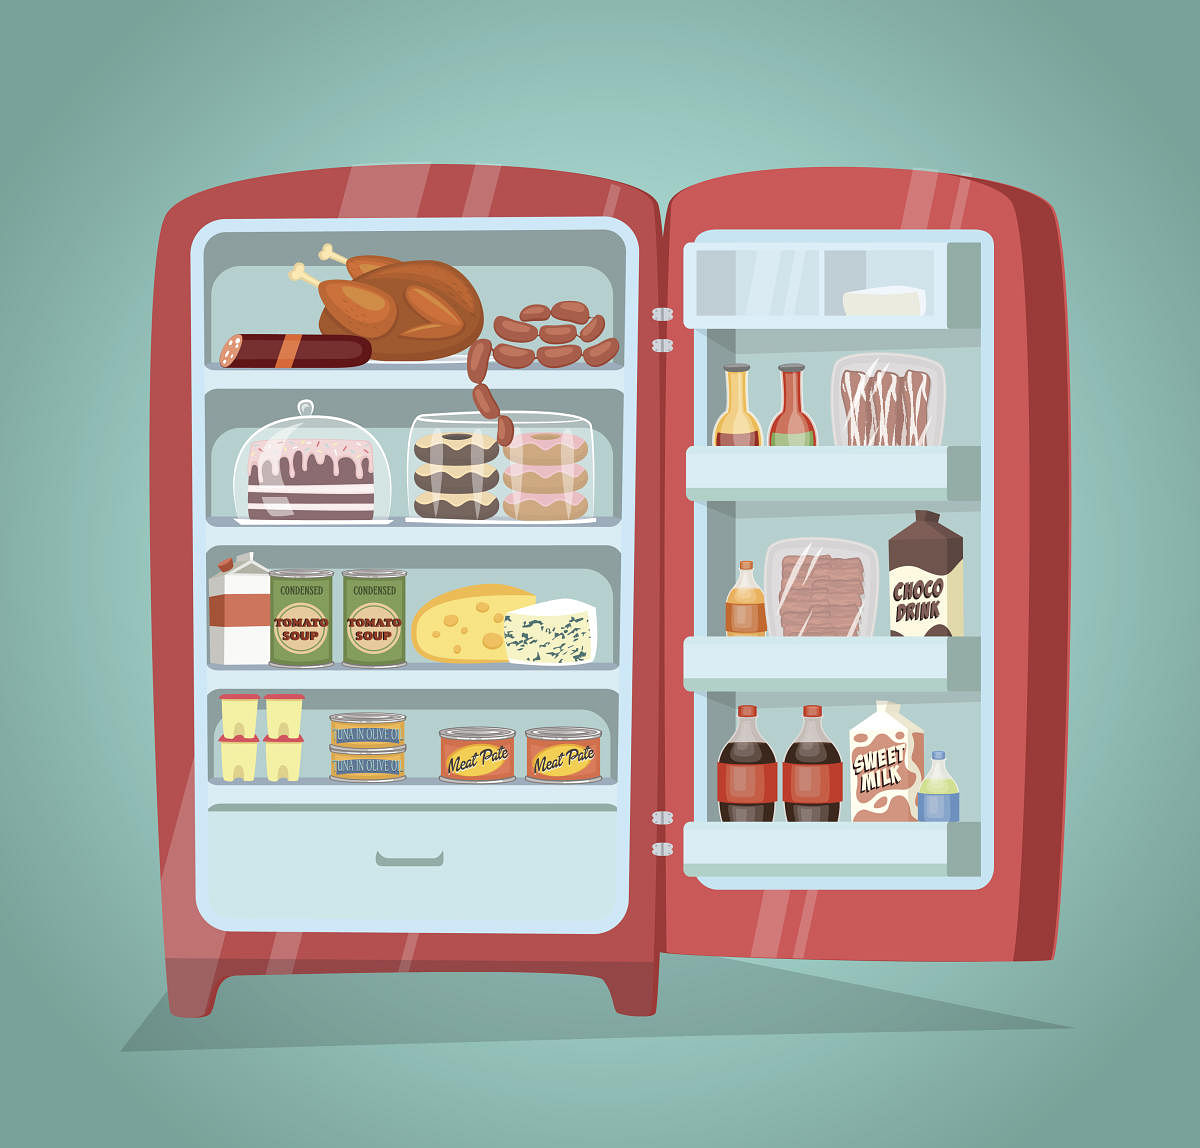 The fridge and freezer are the best tools to aid in keeping freshness.